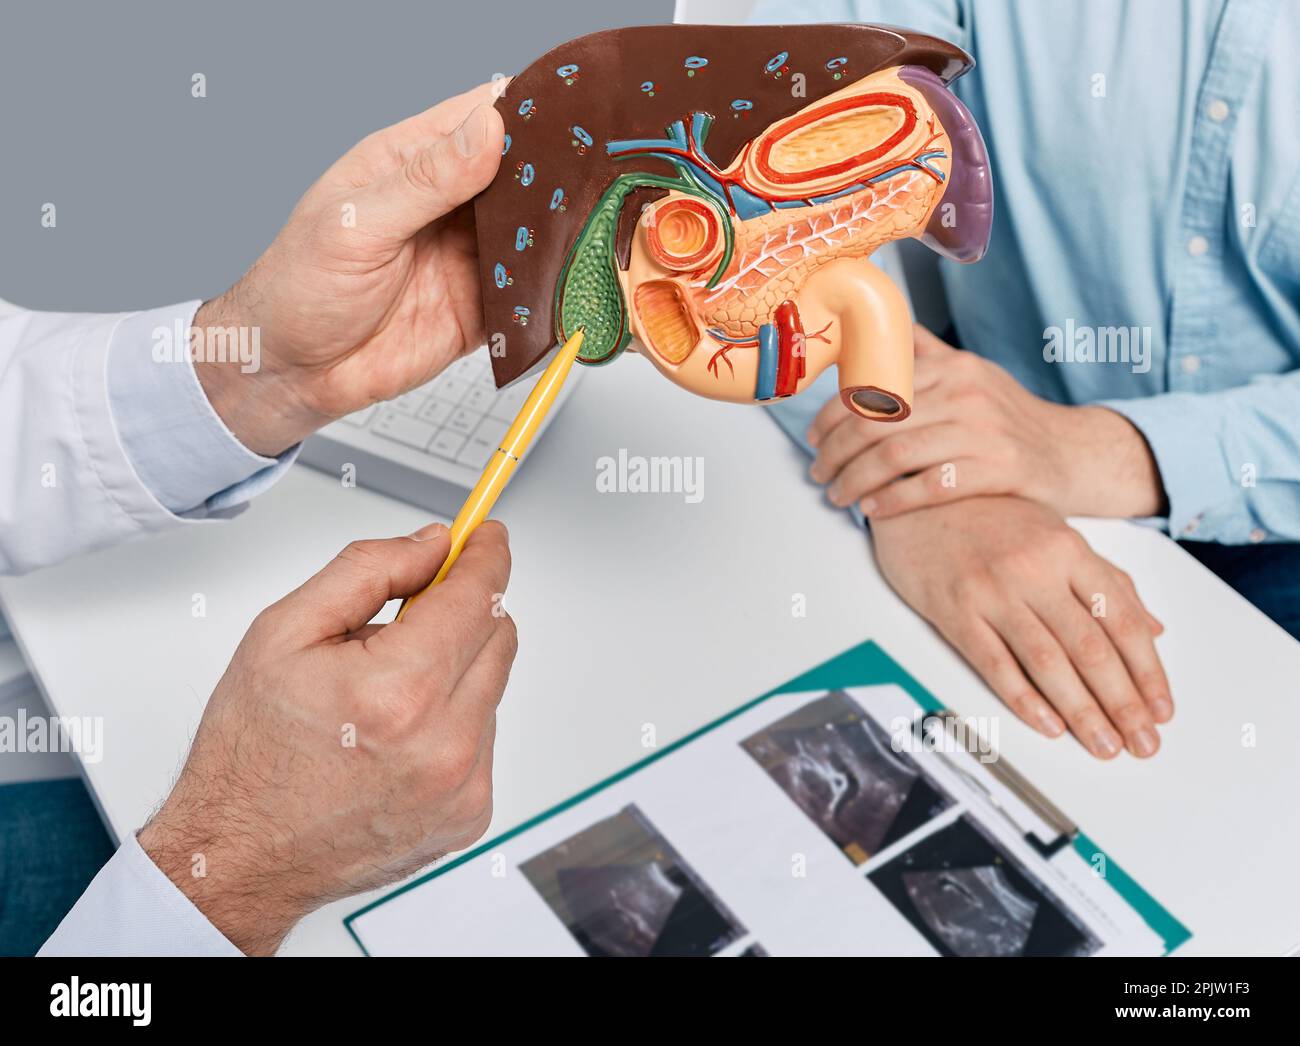 Treatment of gallbladder and liver diseases in medicine, conceptual image. Gastroenterologist showing anatomical model of liver with gallbladder to pa Stock Photo